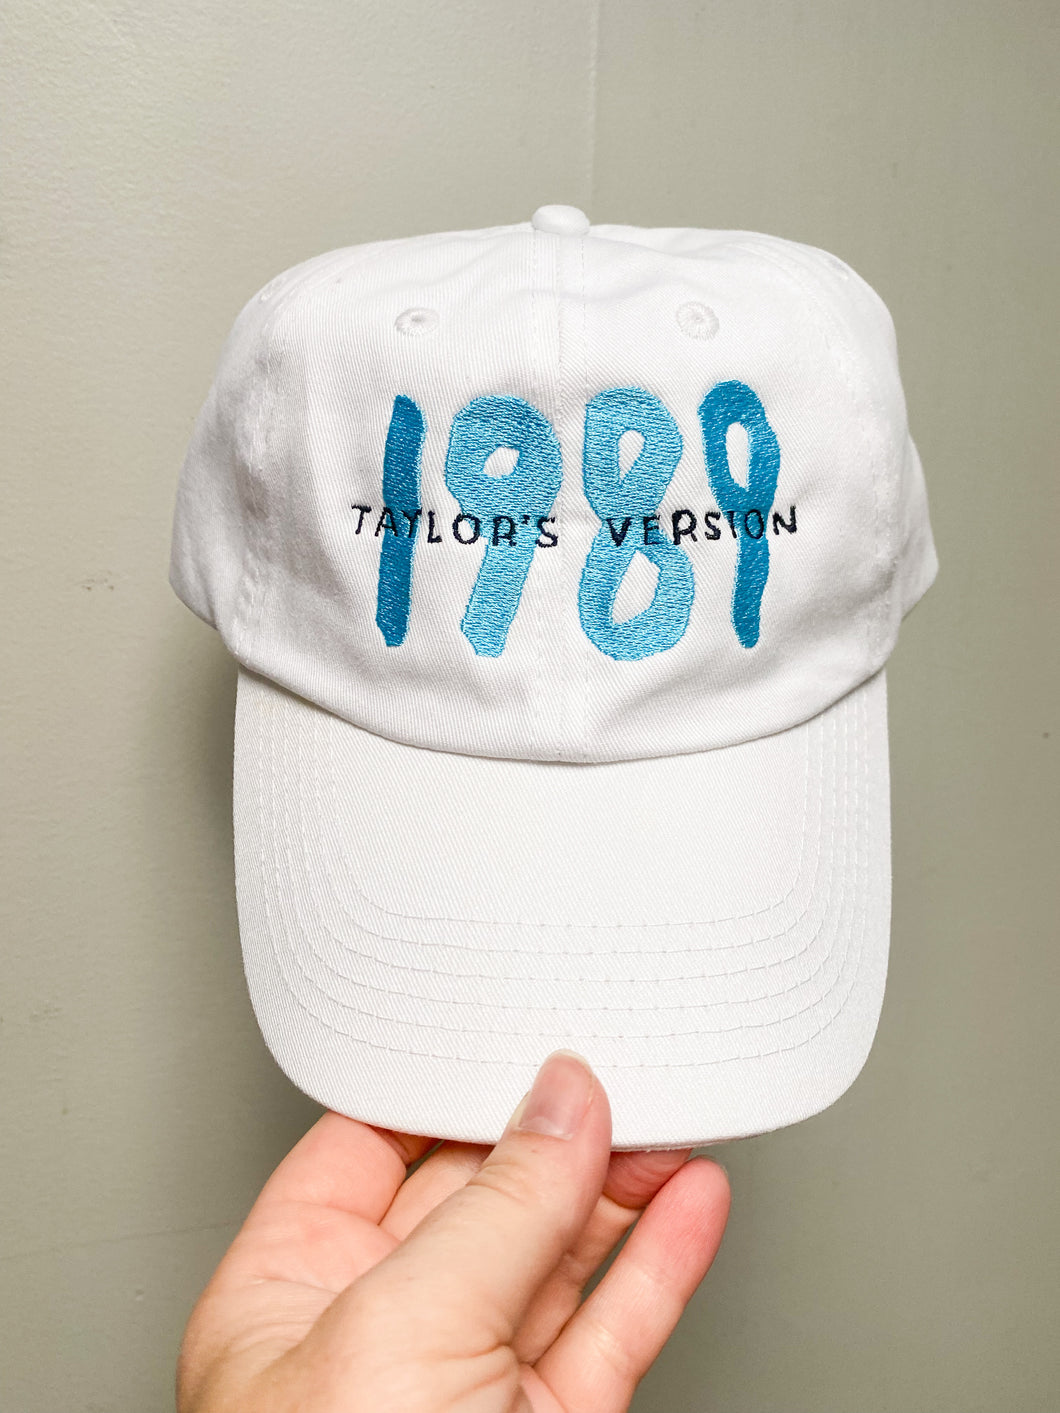 1989 Taylor’s Version Relaxed Fit Hat